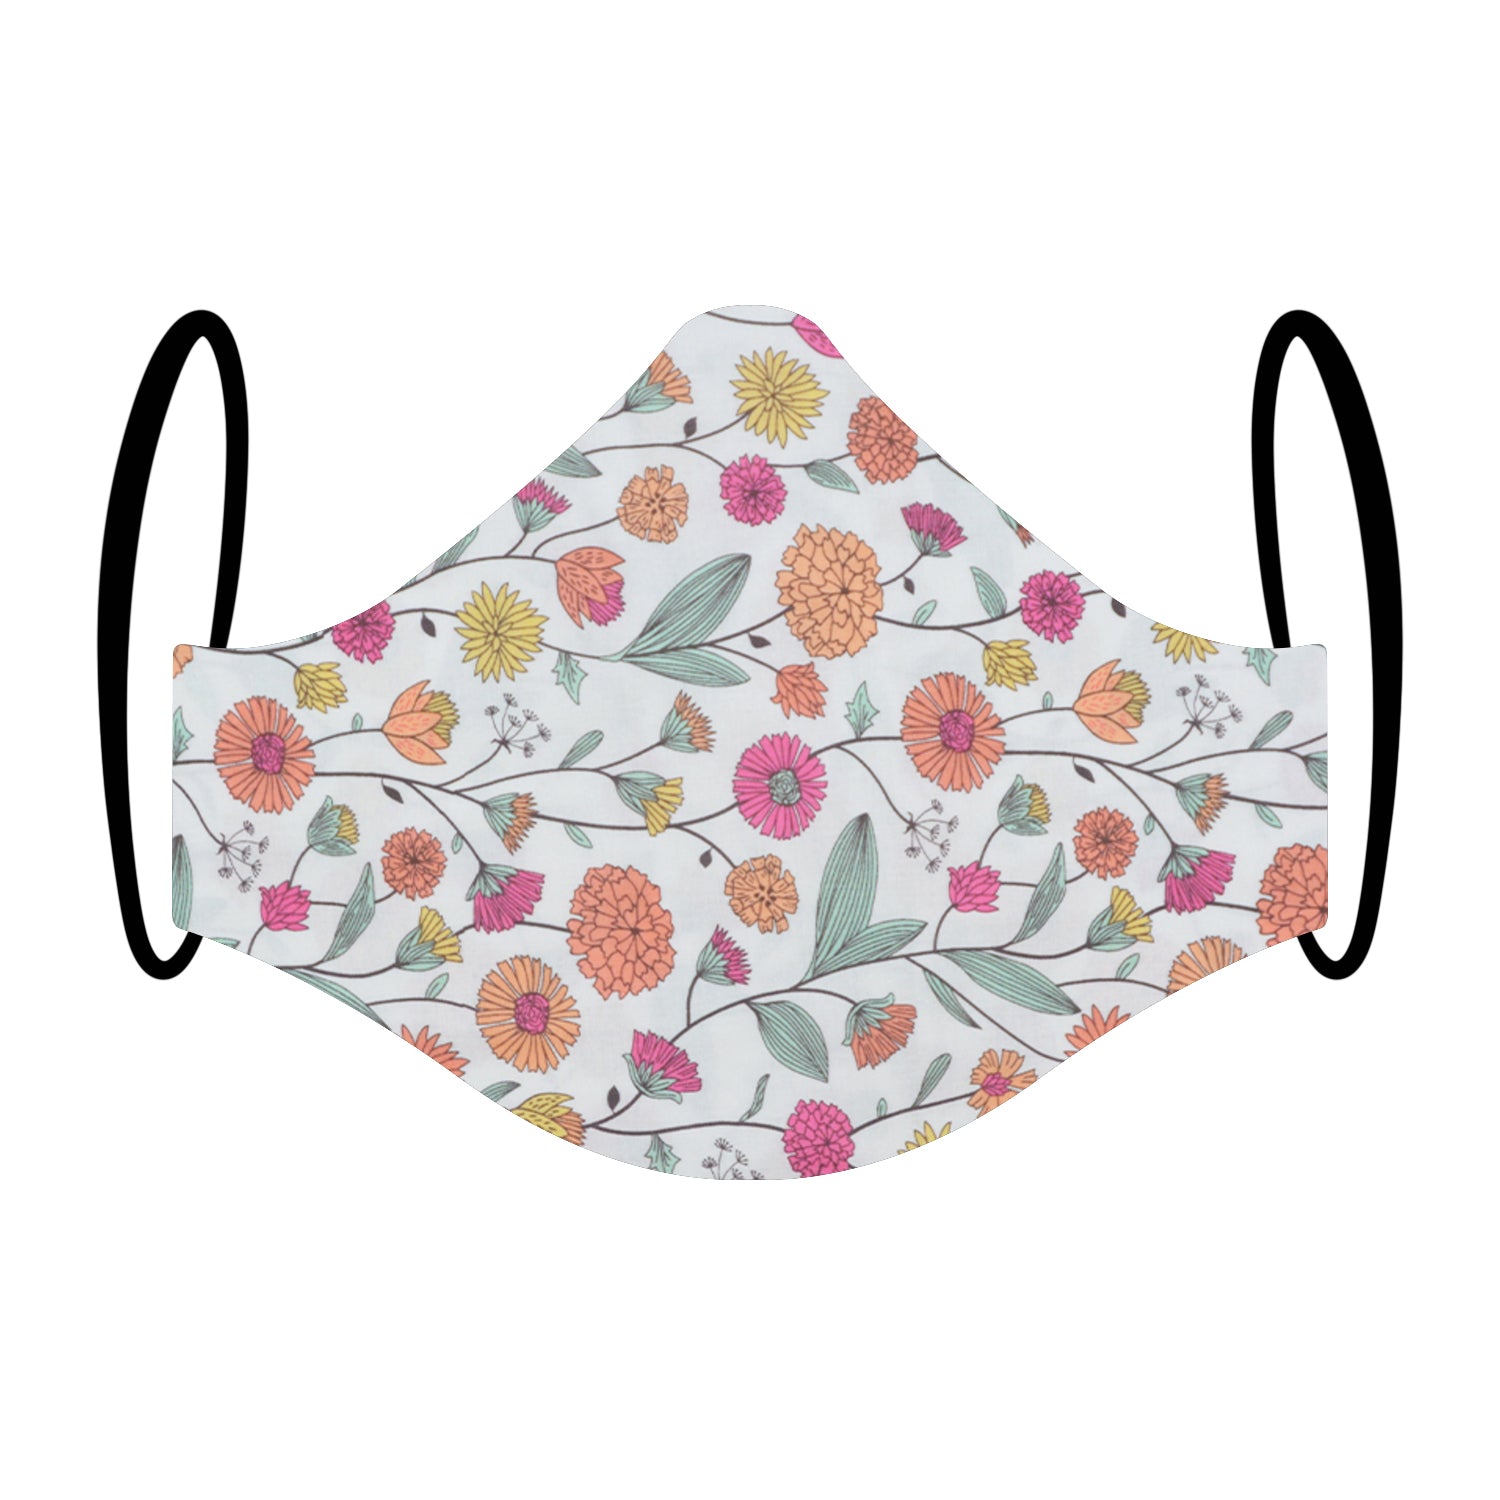 "Whoops a Daisy" Floral Print Triple-layer Washable Face Mask